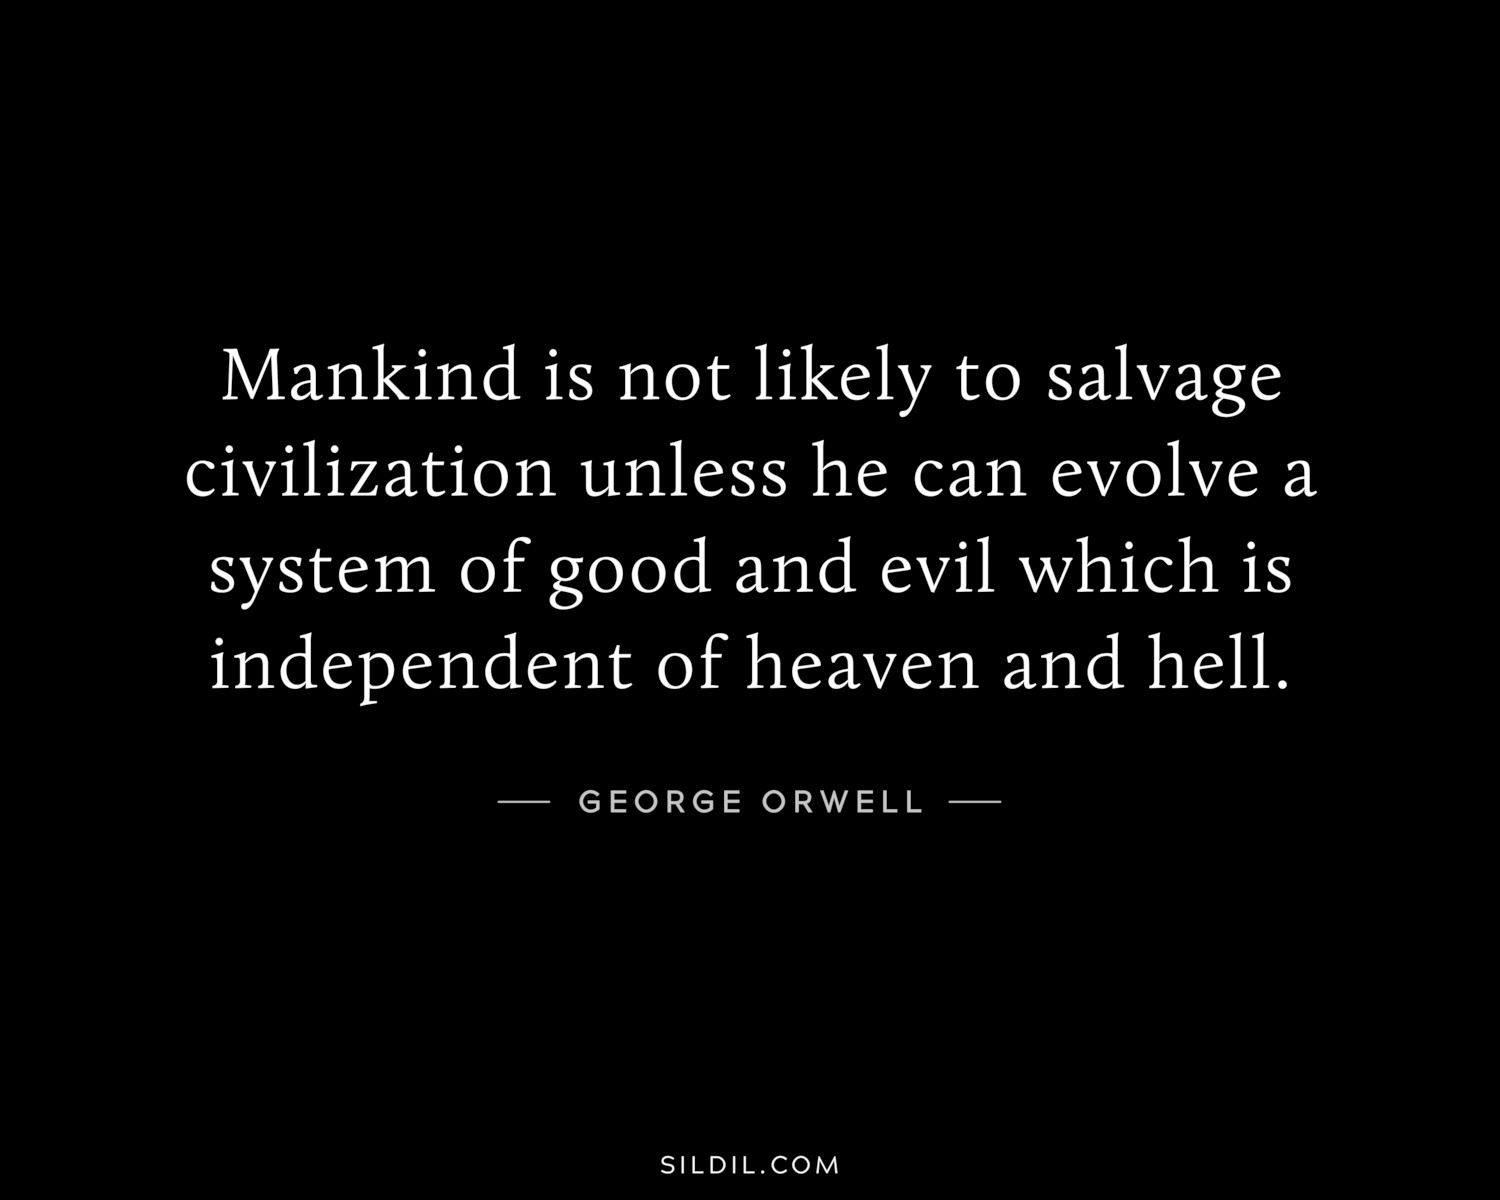 Mankind is not likely to salvage civilization unless he can evolve a system of good and evil which is independent of heaven and hell.